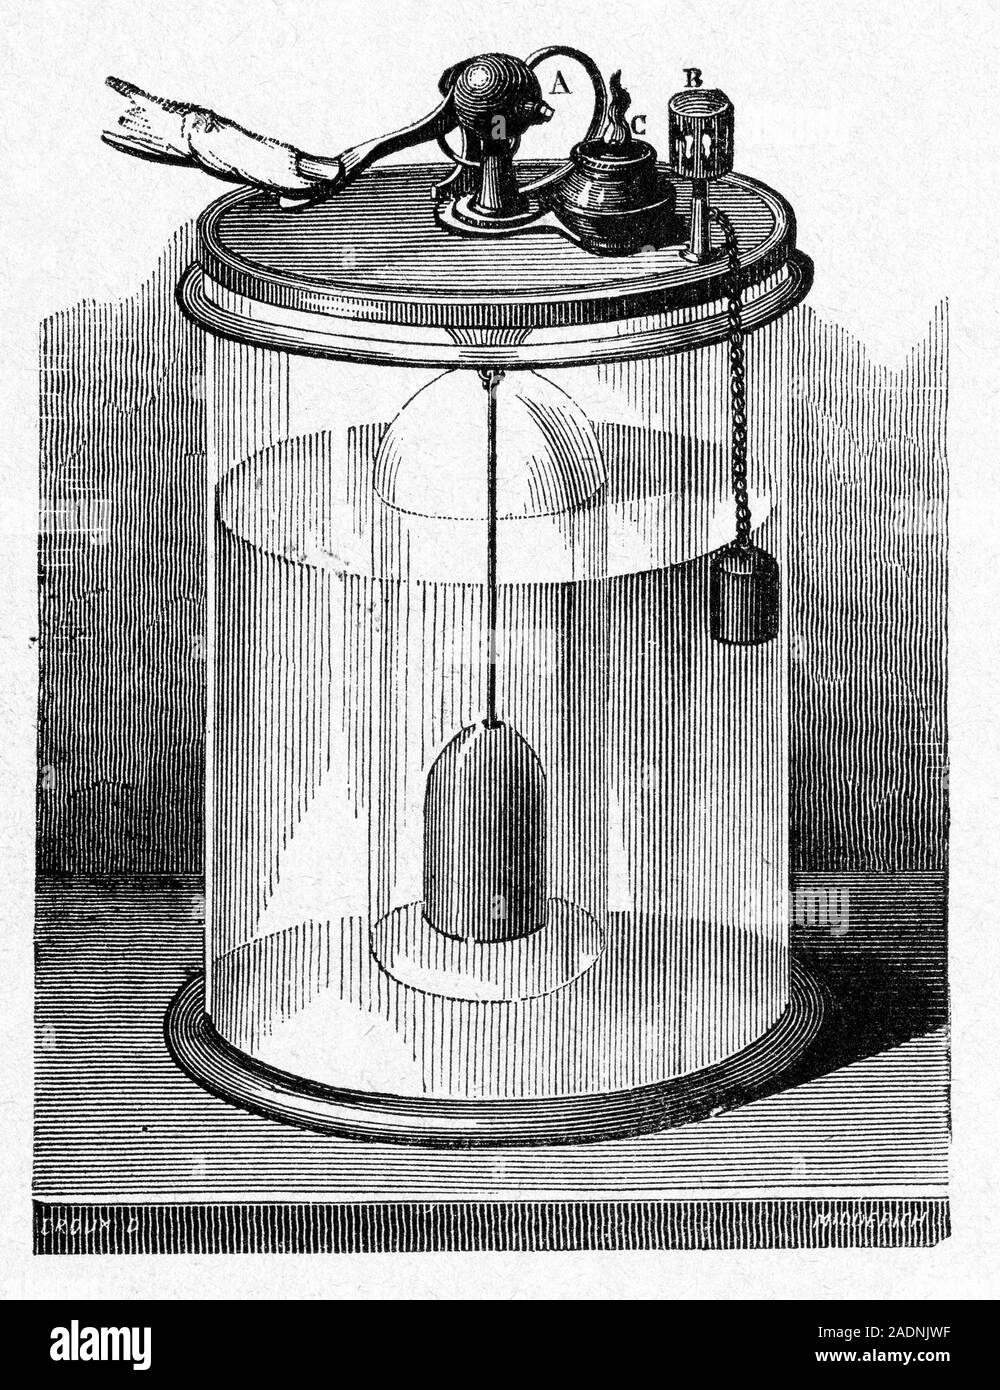 Lussac's hydro-lighter. 19th century artwork of the hydro-lighter invented  by the French chemist and physicist Joseph Louis Gay-Lussac (1778-1850). Ga  Stock Photo - Alamy